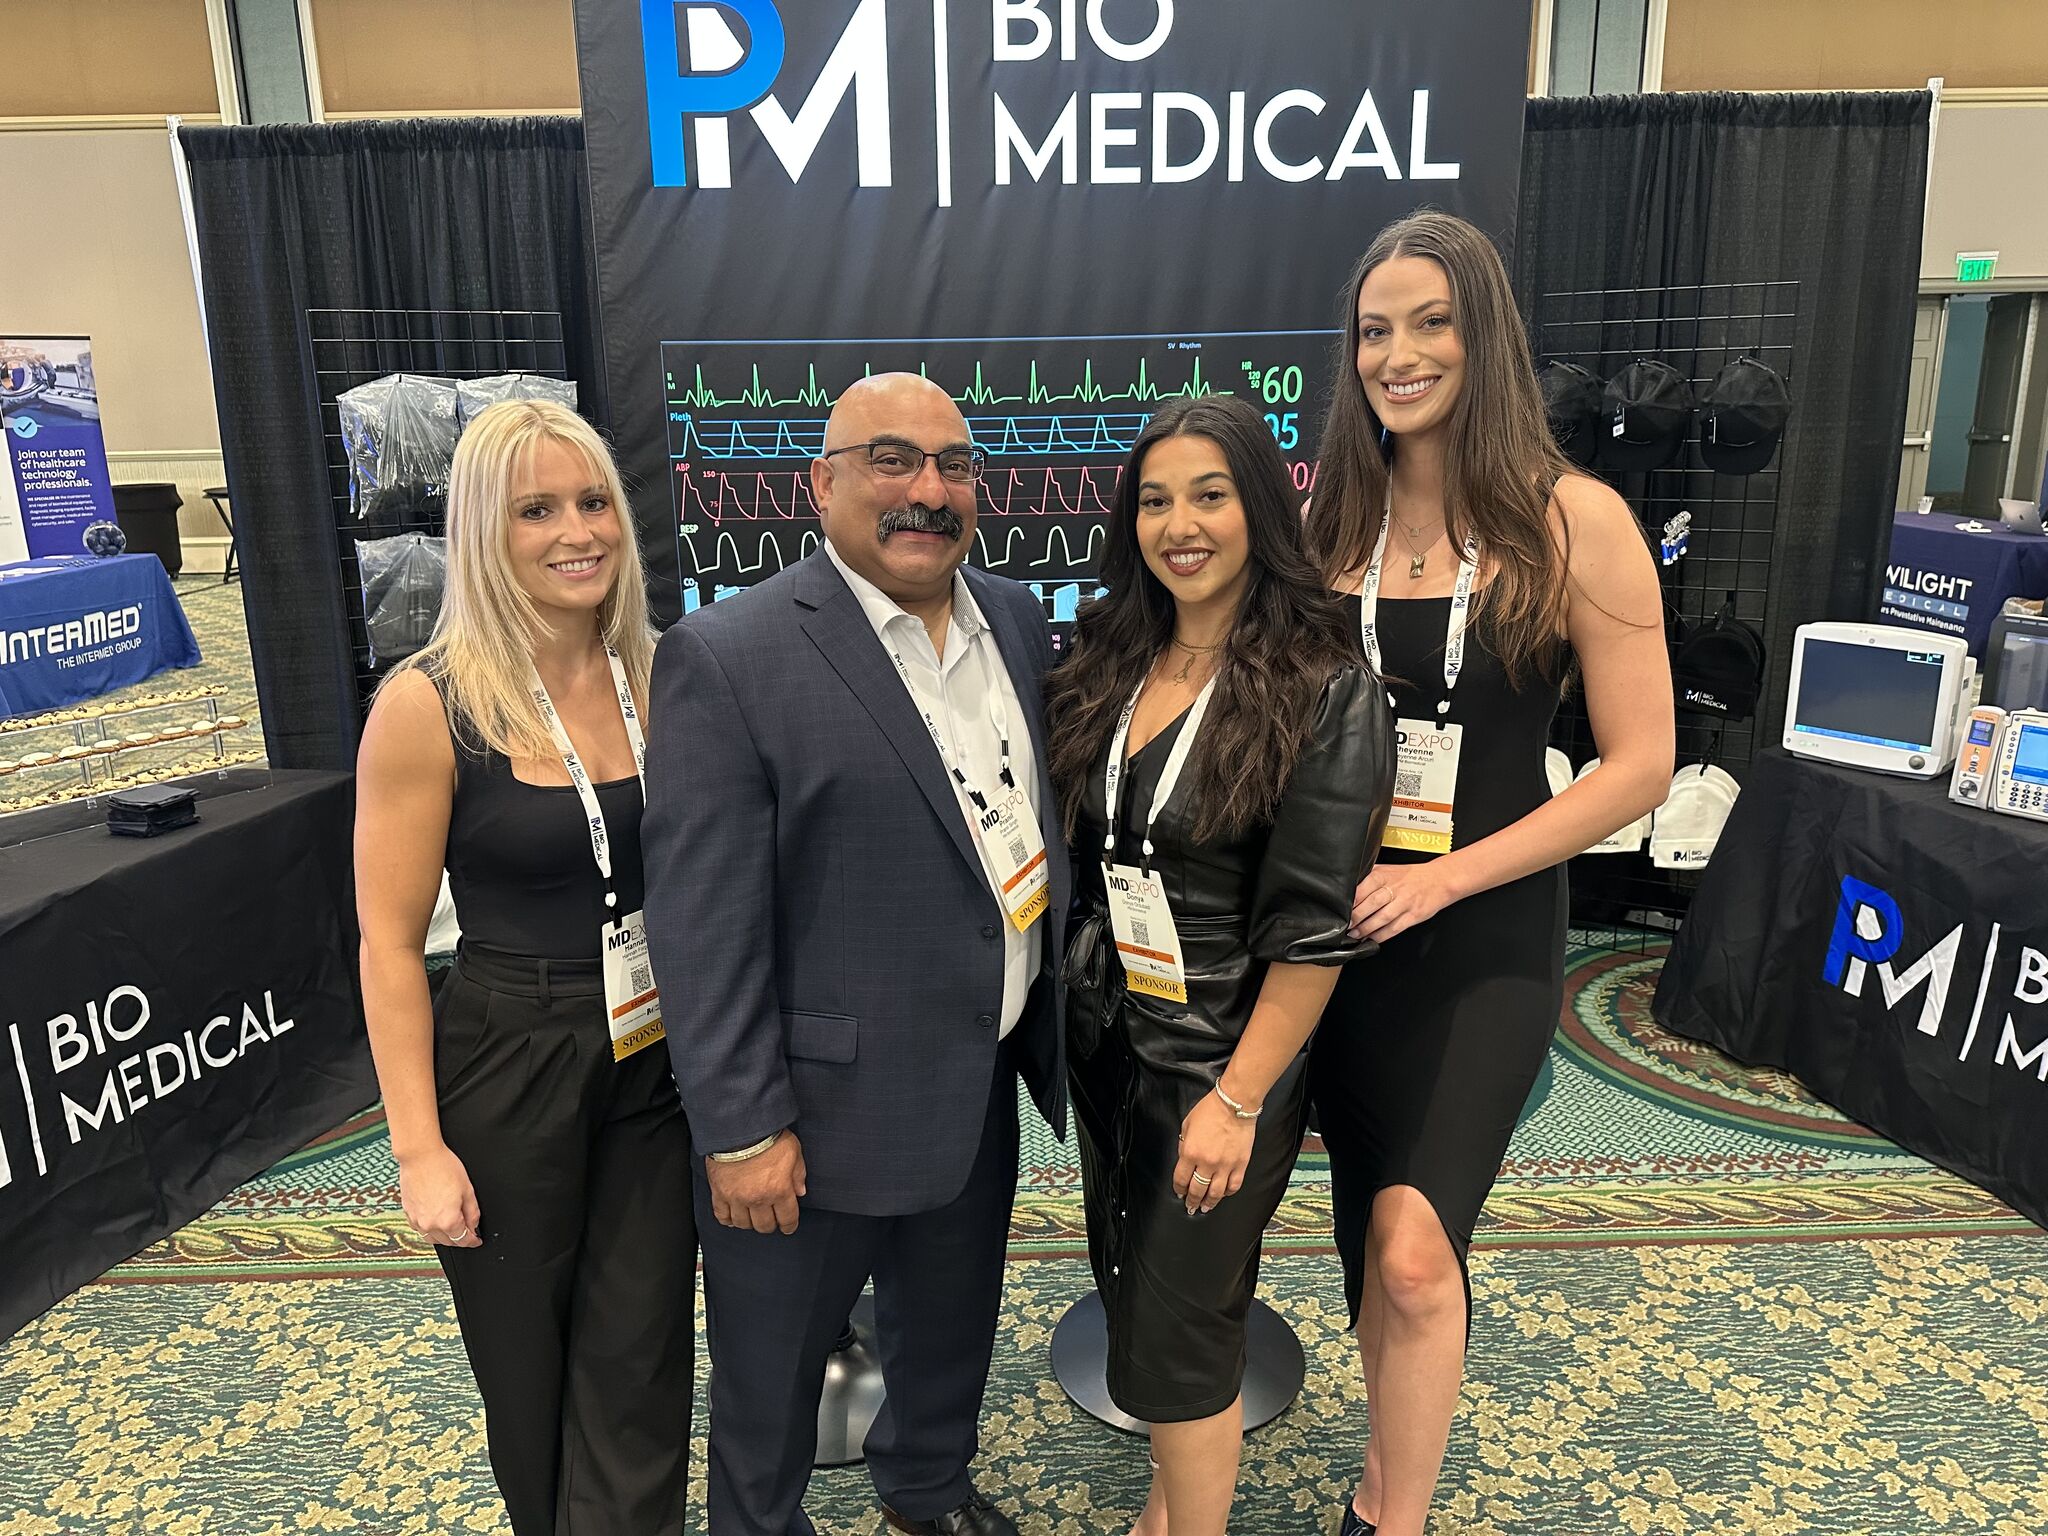 We Had a Blast at the latest MD EXPO!